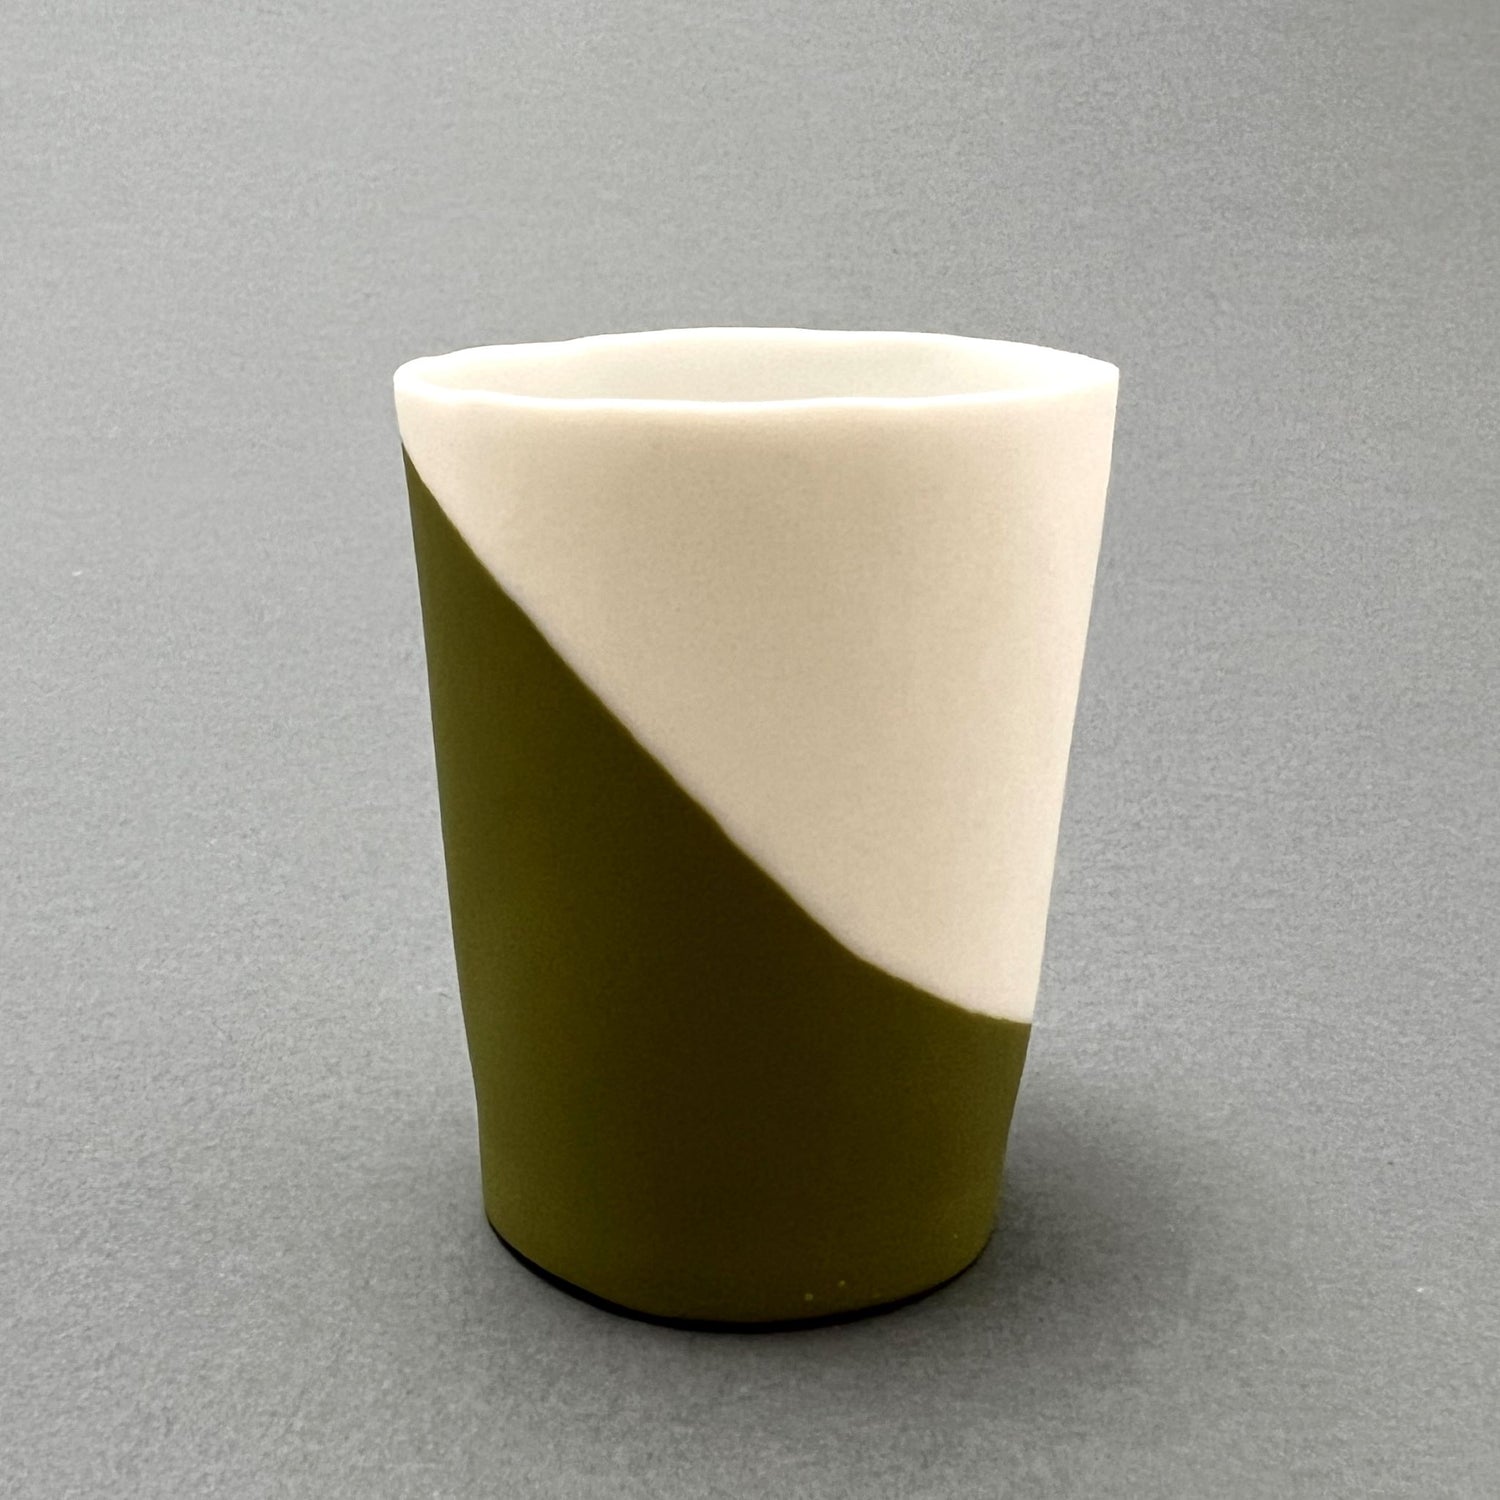 A small forest green and white colored porcelain cup standing on a gray background